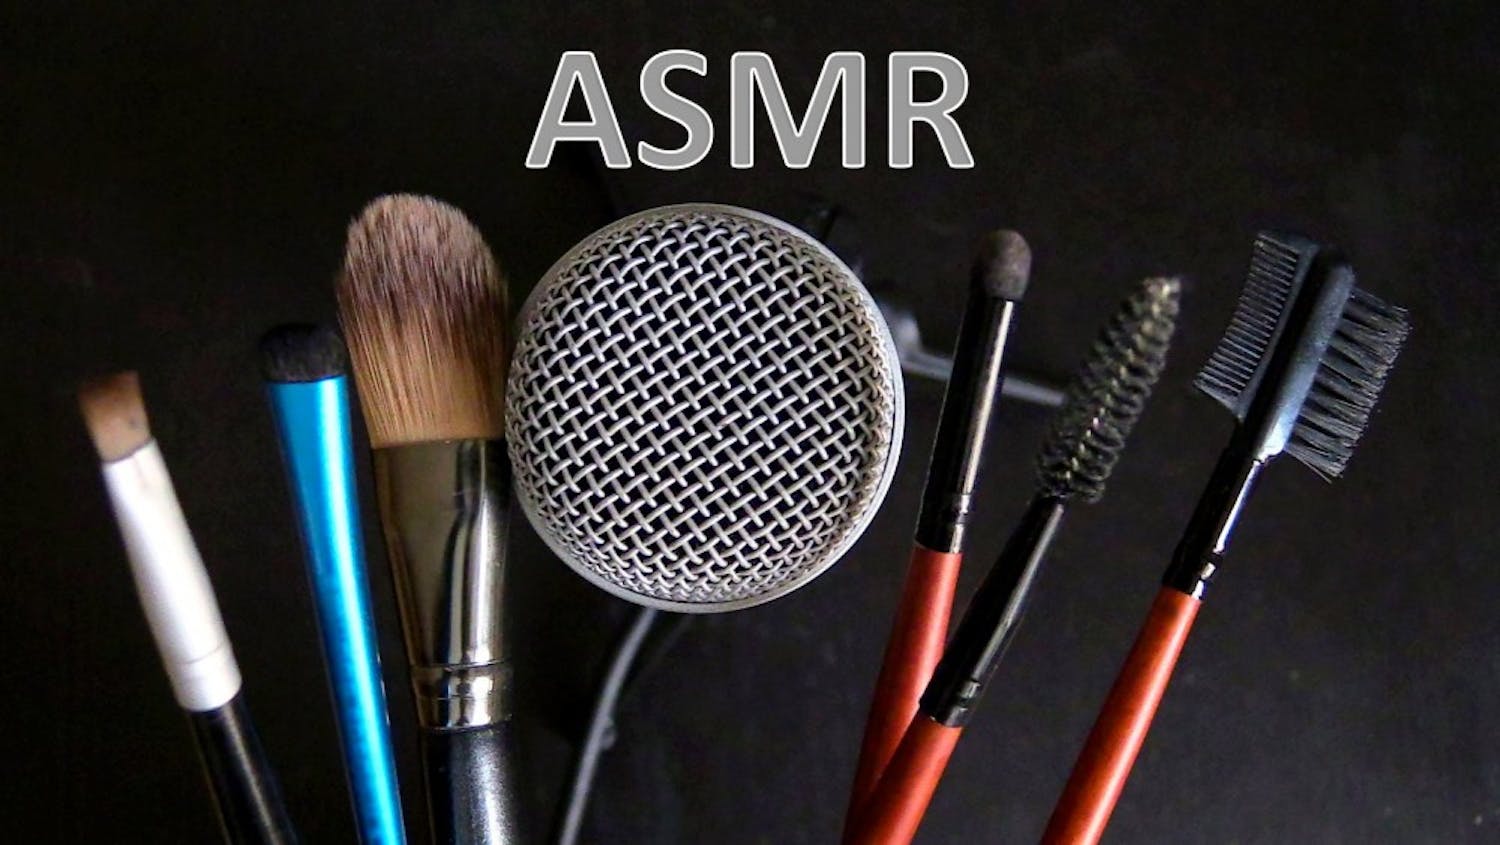 ASMR YouTube videos feature everyday things like brushes, boxes and gum-chewing to relax their viewers. Photo by YouTube channel Olinya.